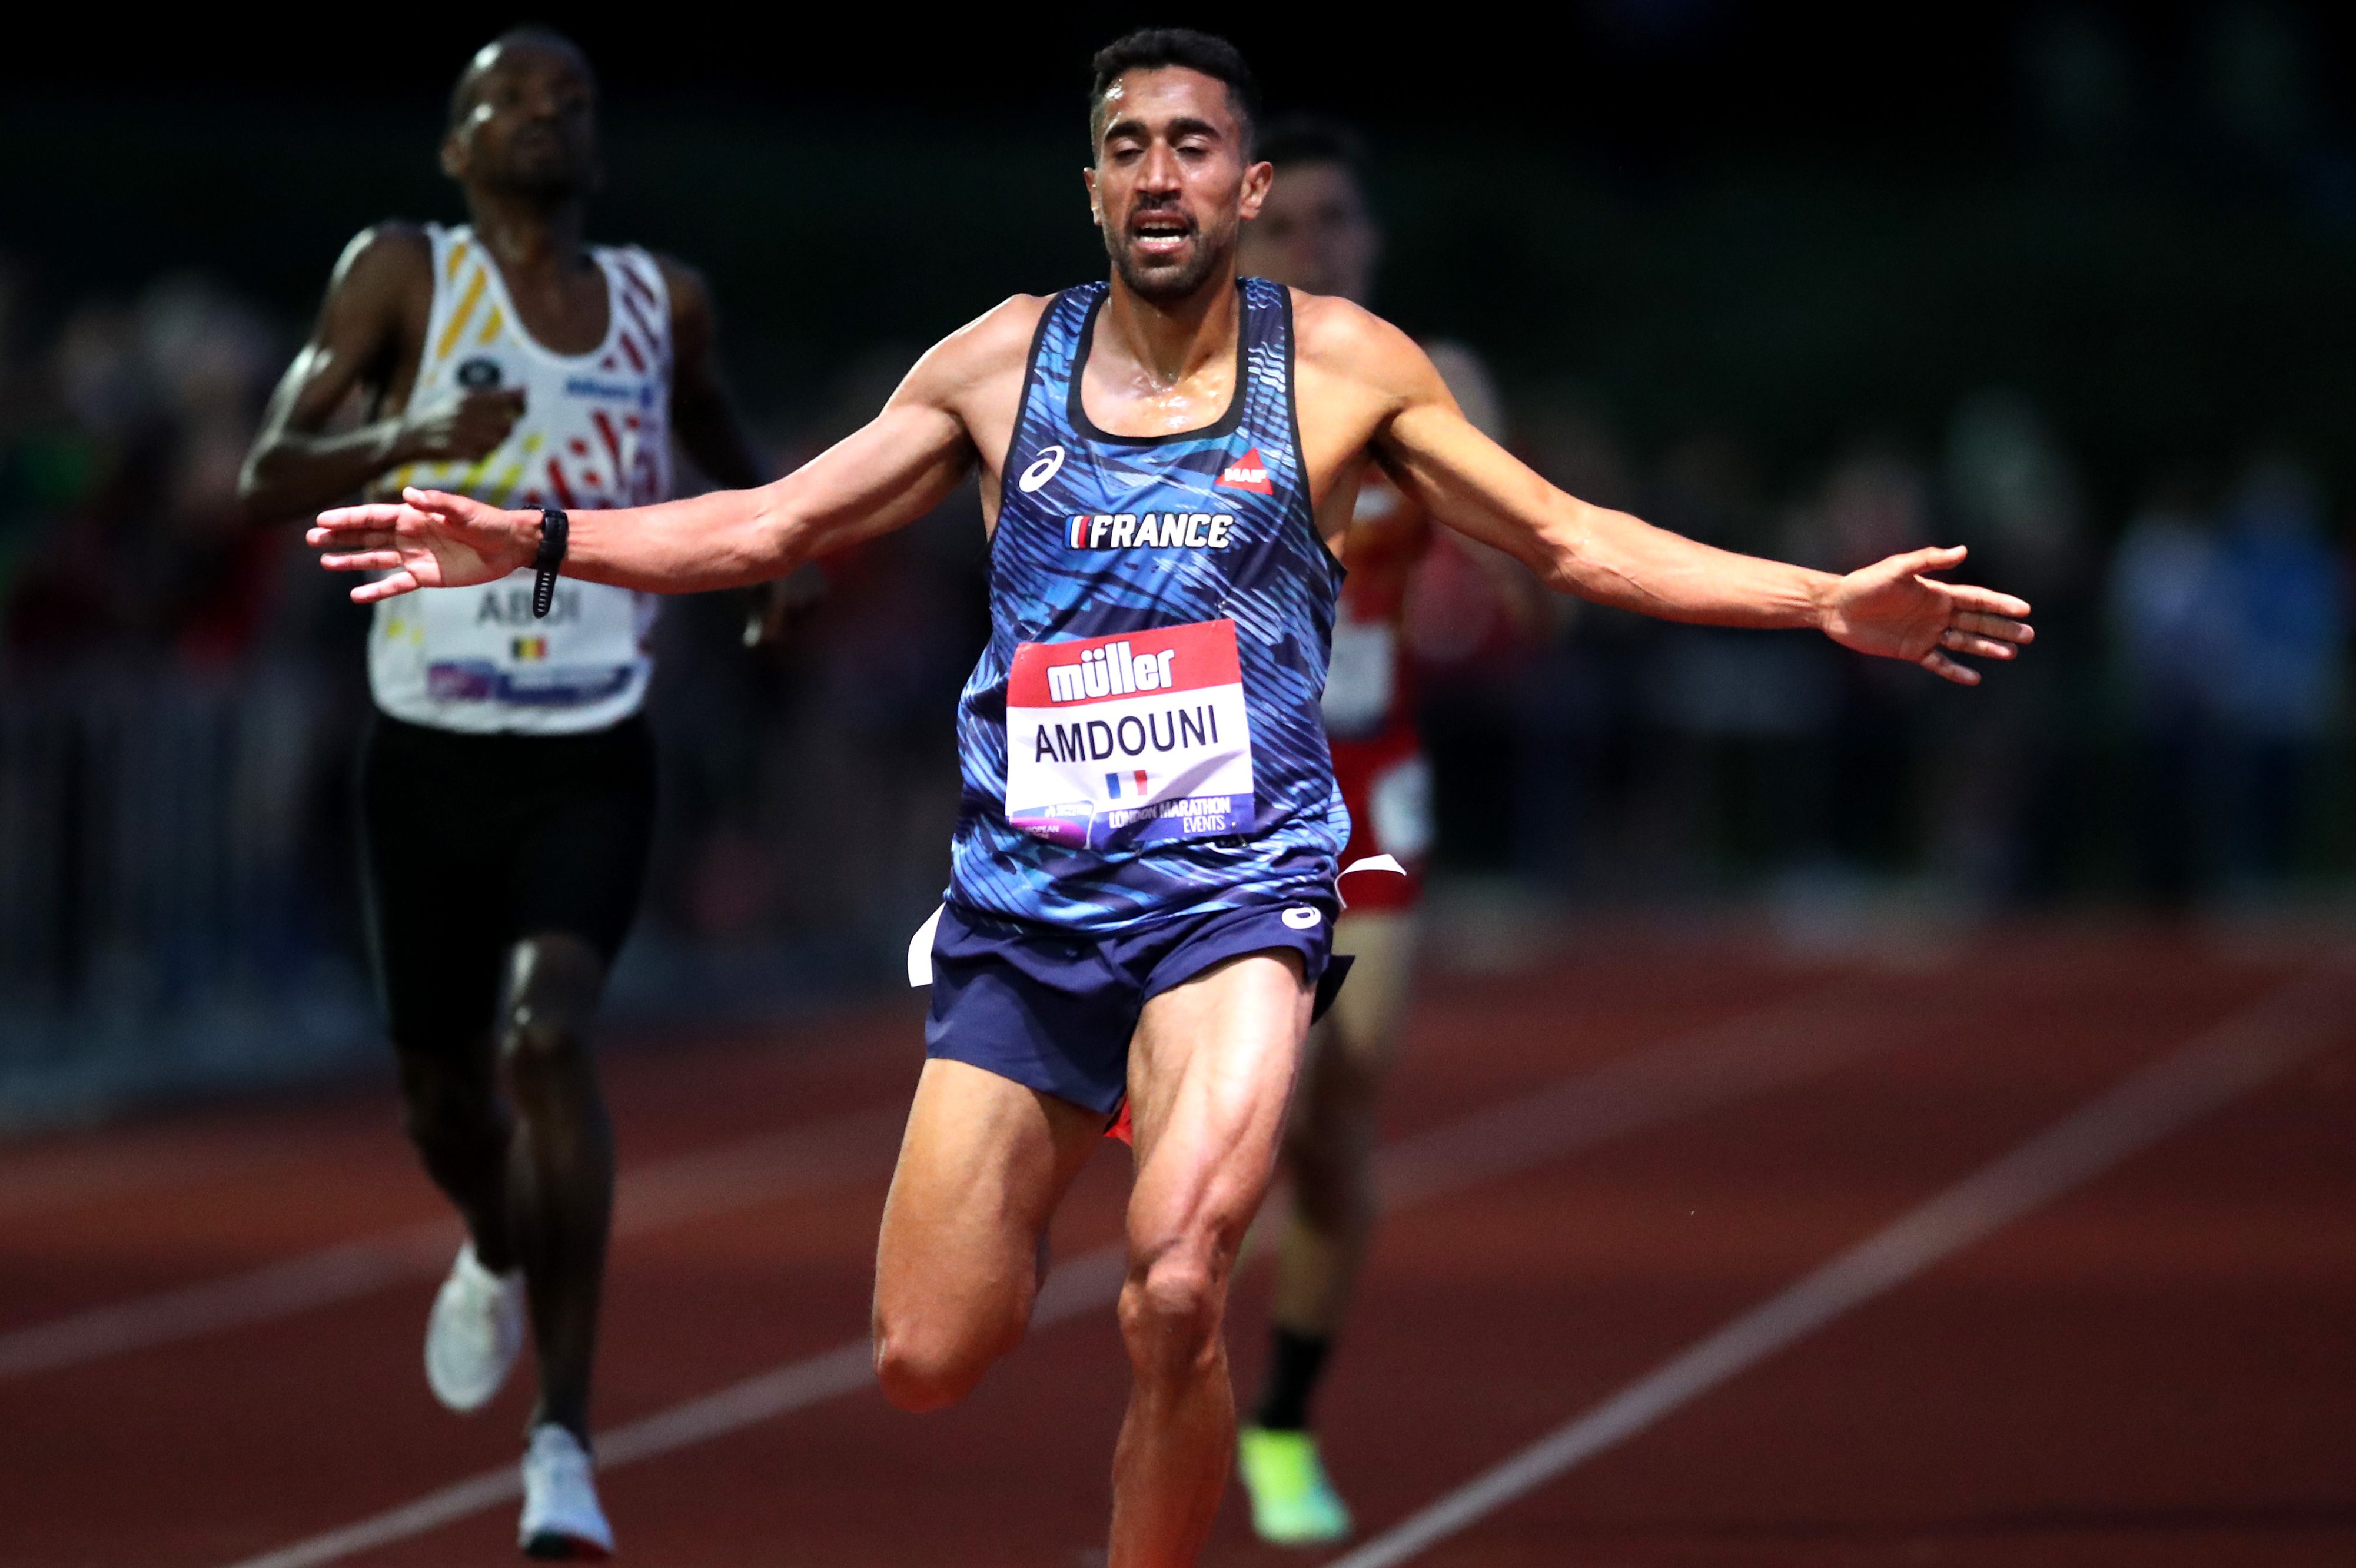 Morhad Amdouni of France at the Müller British Athletics 10,000m Championships. The runner courted controversy at the Tokyo Olympics after knocking over water bottles during the men's marathon race.